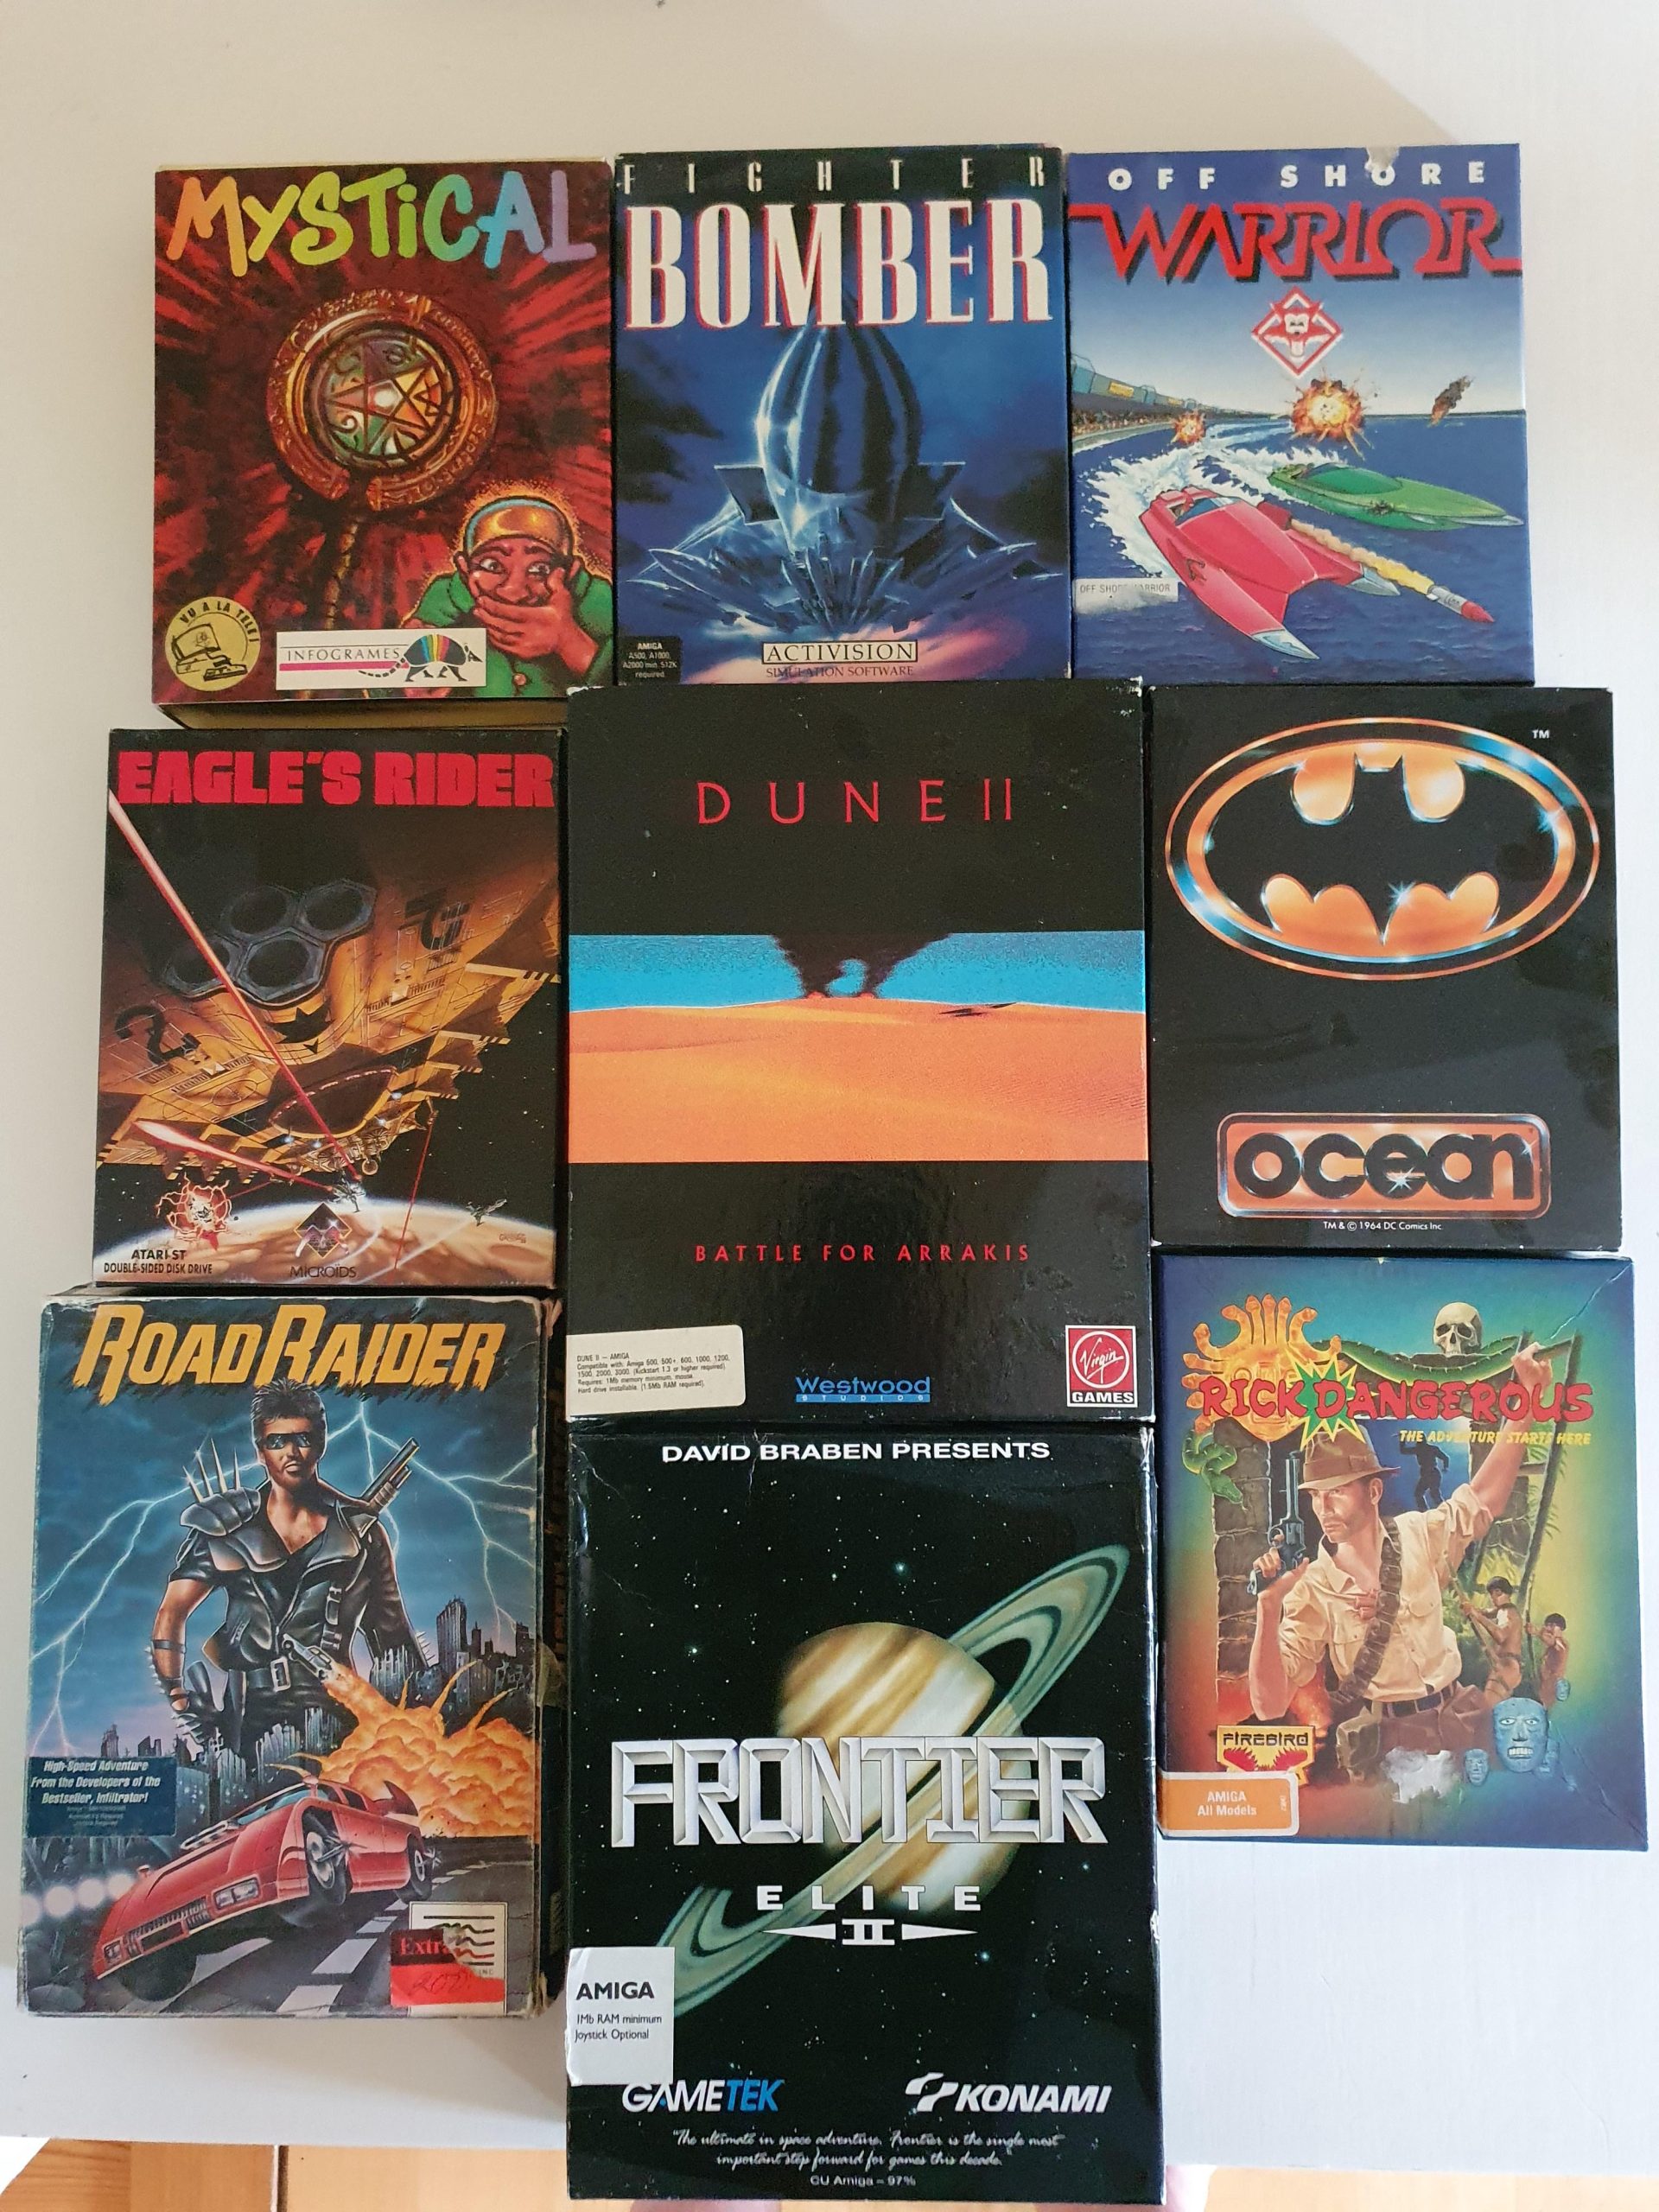 I realized I am this previous – my previous Amiga video games